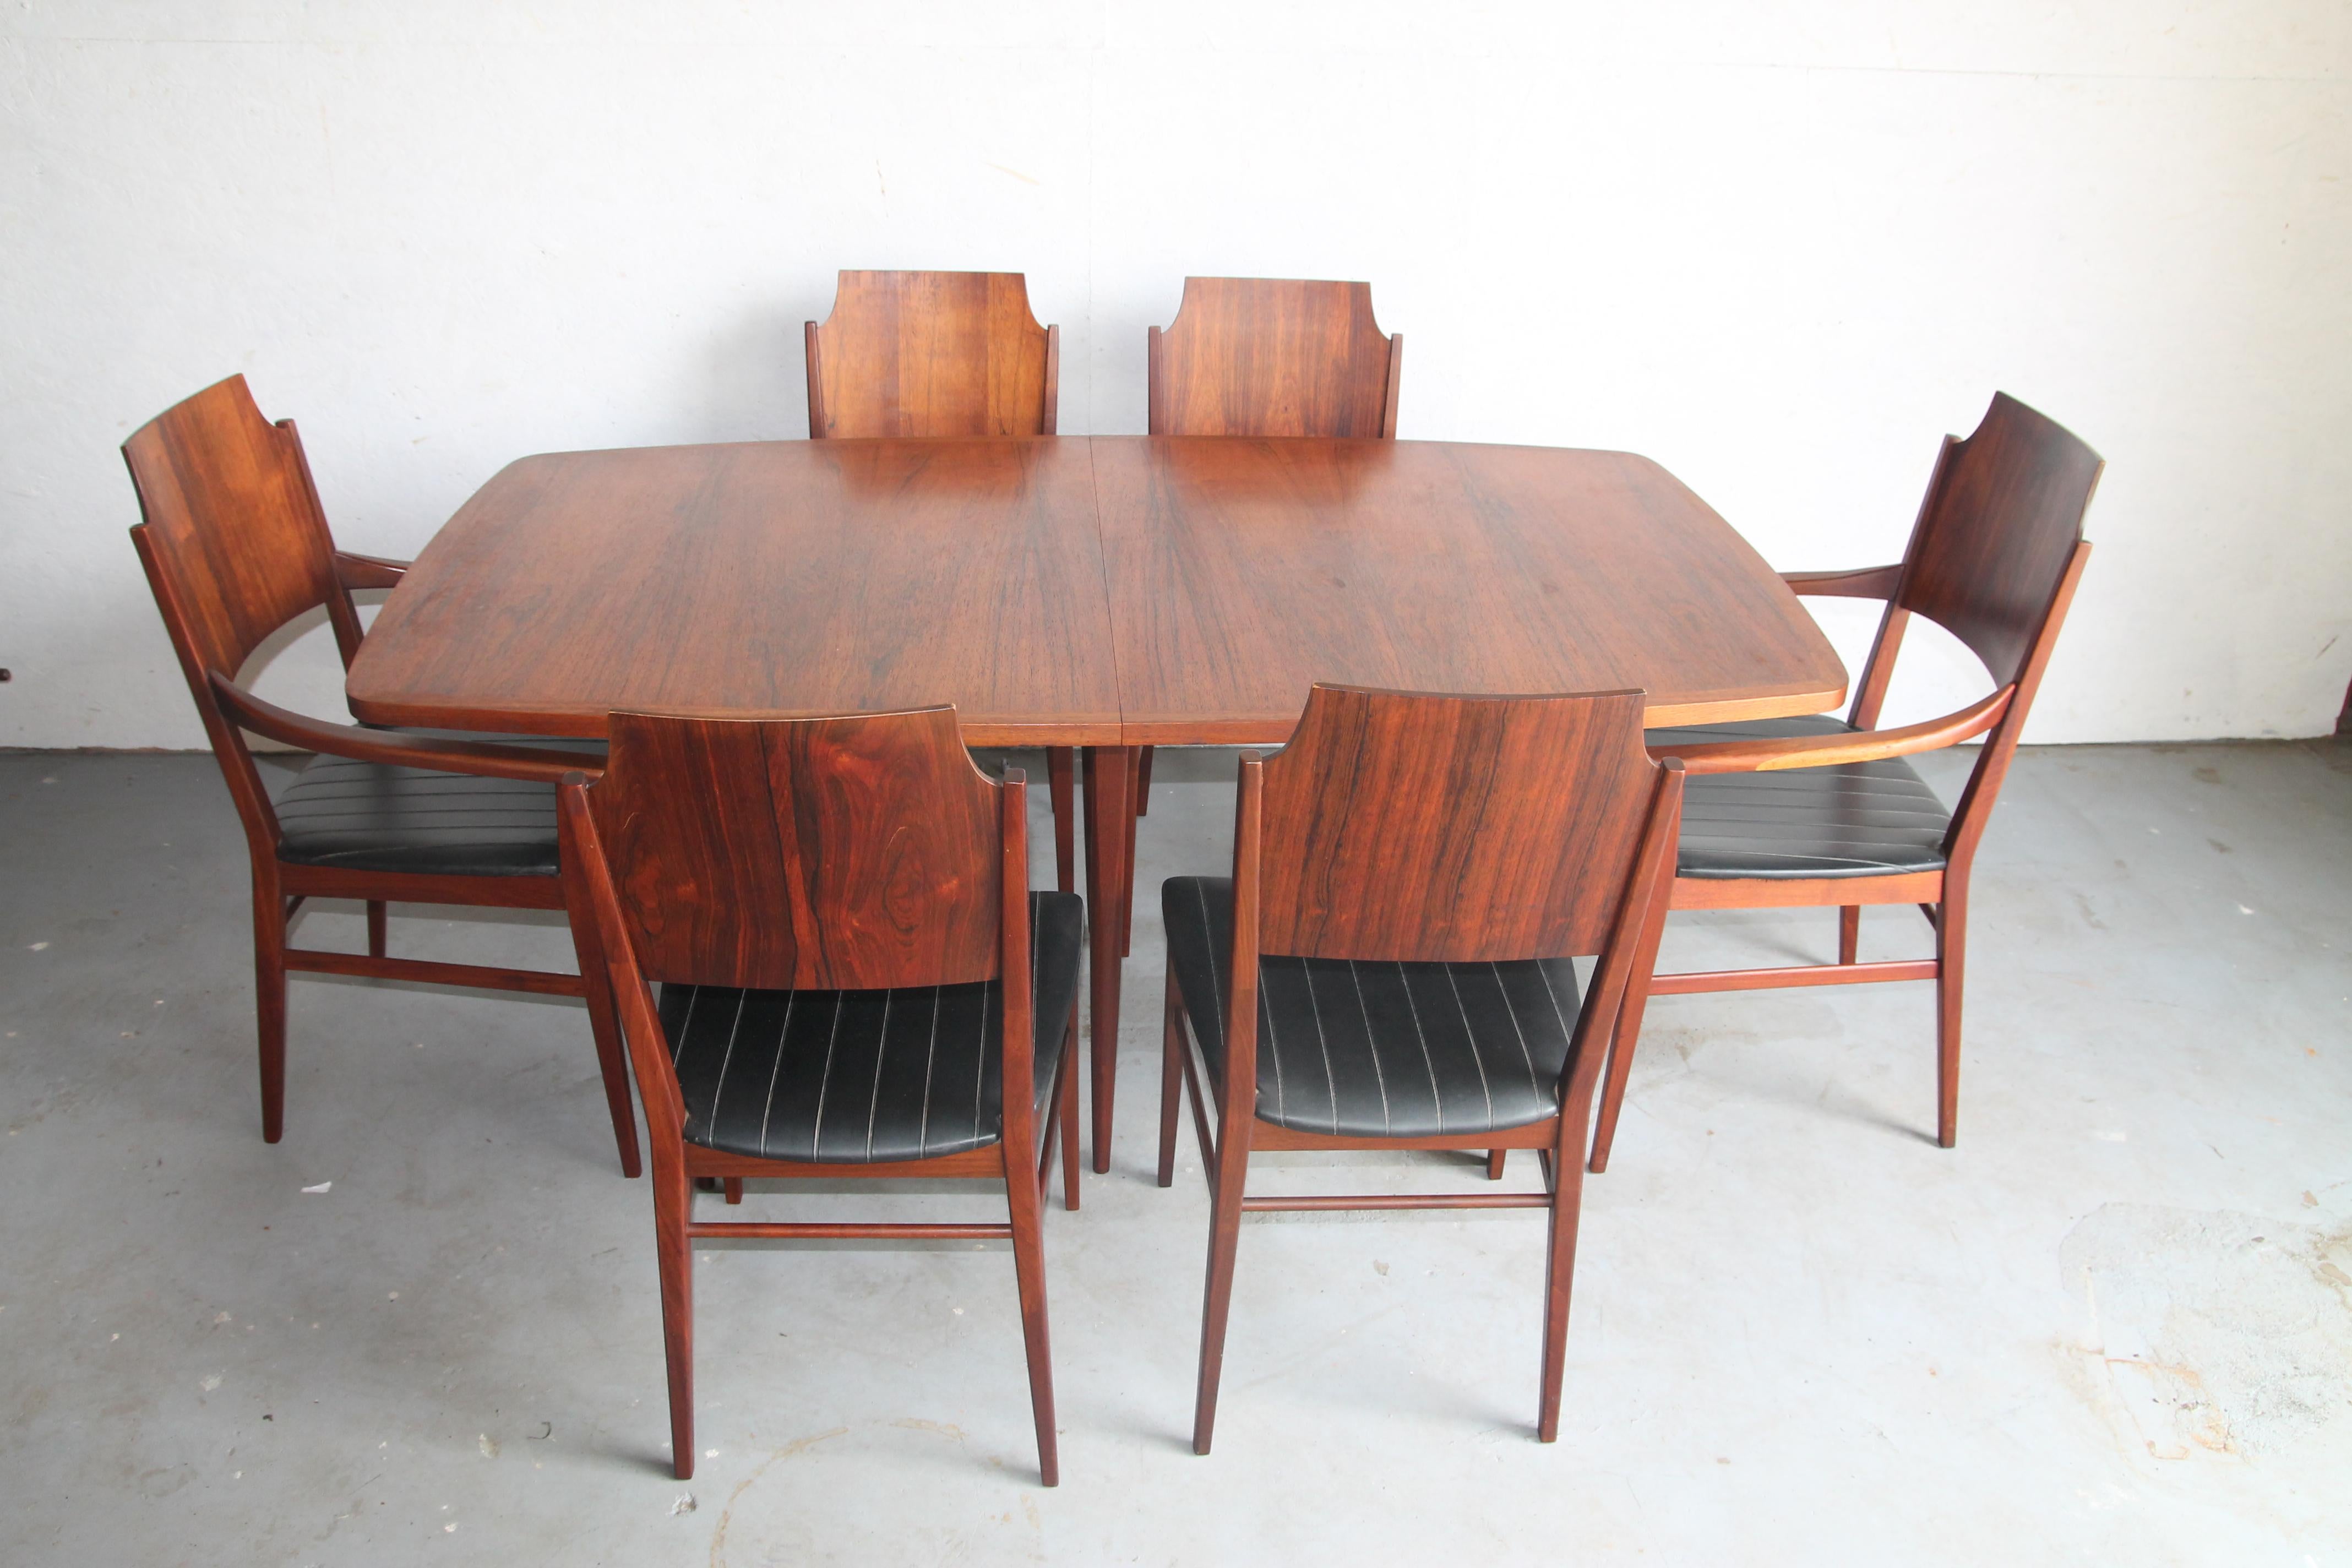 Rare dining table with 3 leaves, 4 side chairs and 2 armchairs designed by Paul McCobb for Lane in the 1960s. McCobb worked for Lane from 1961-1965. He designed 3 lines for them. This set is from the Delineator line. The chairs and the legs of the